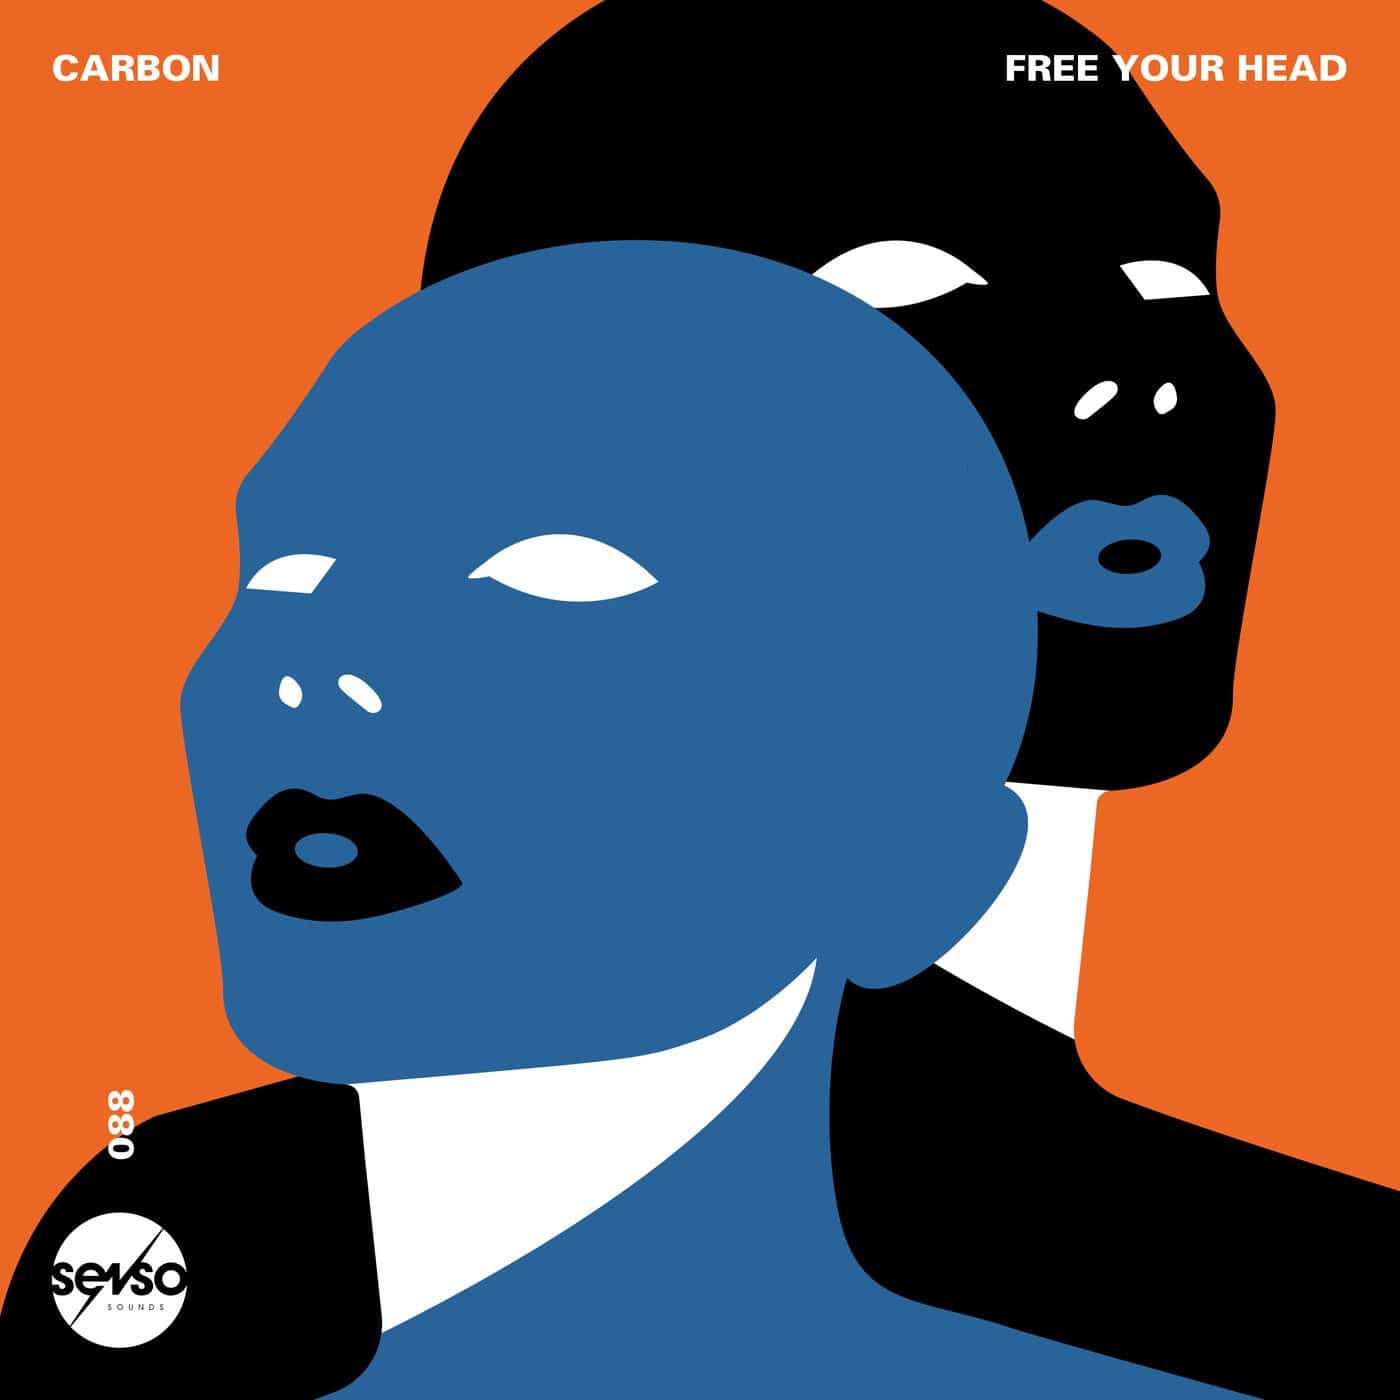 Download Free Your Head on Electrobuzz